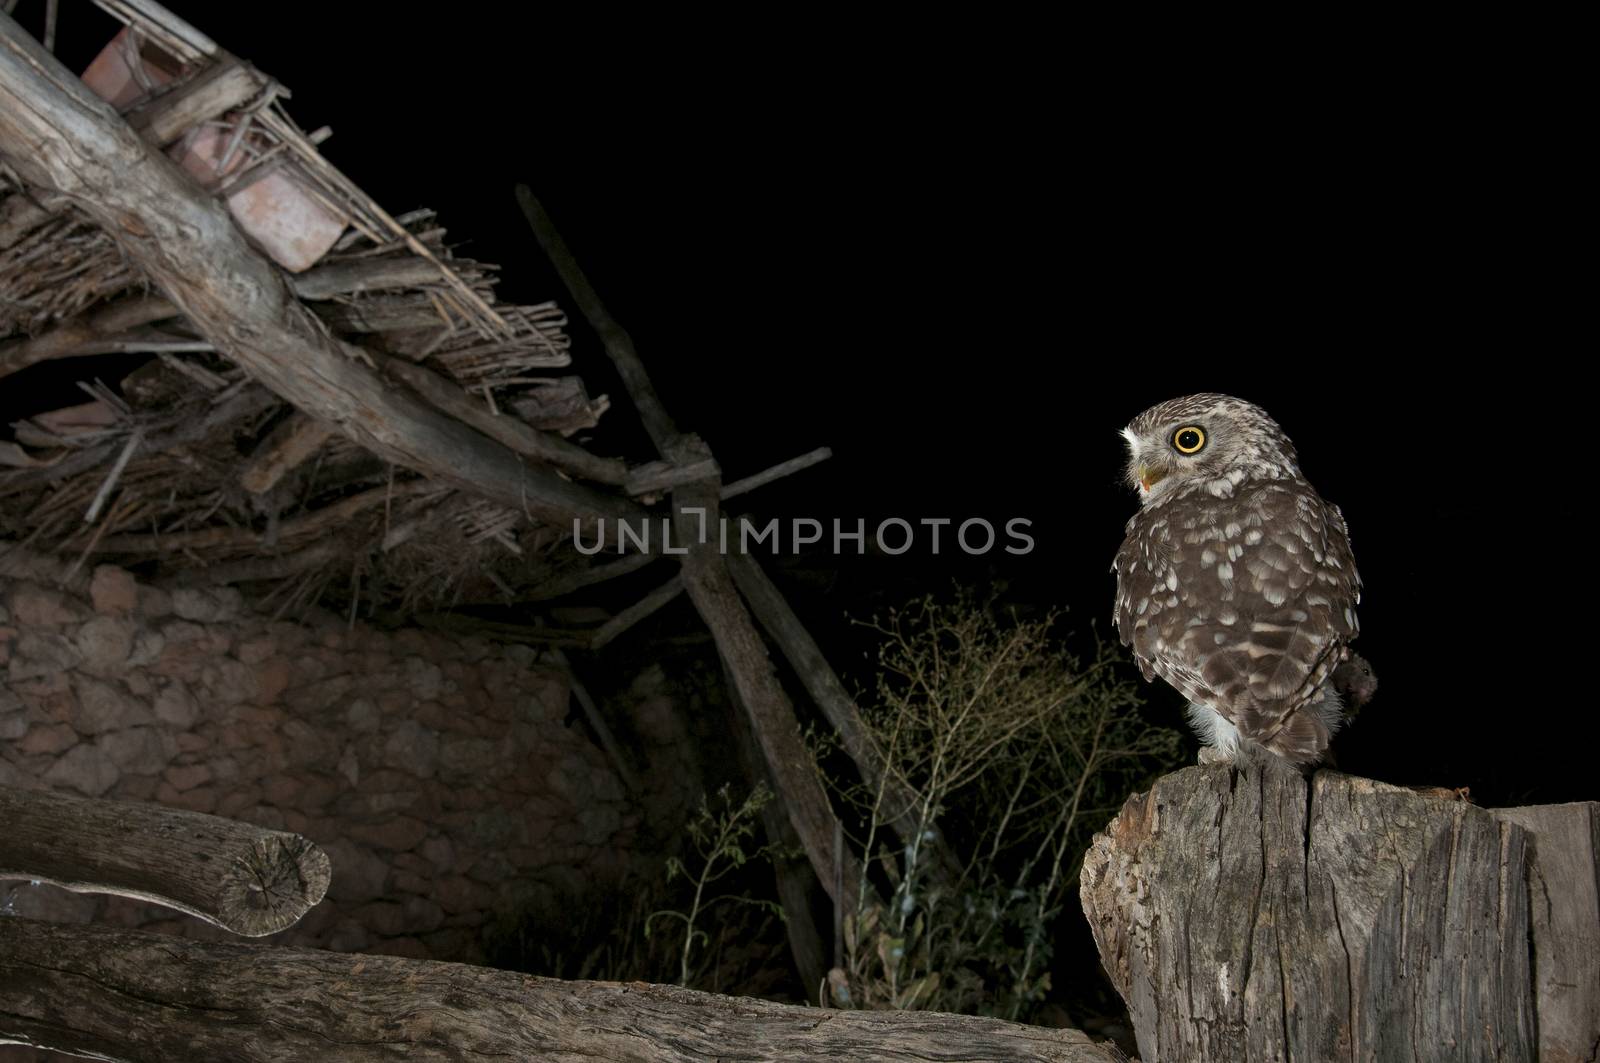 Athene noctua owl, perched on stick of an old ruined house, Little Owl